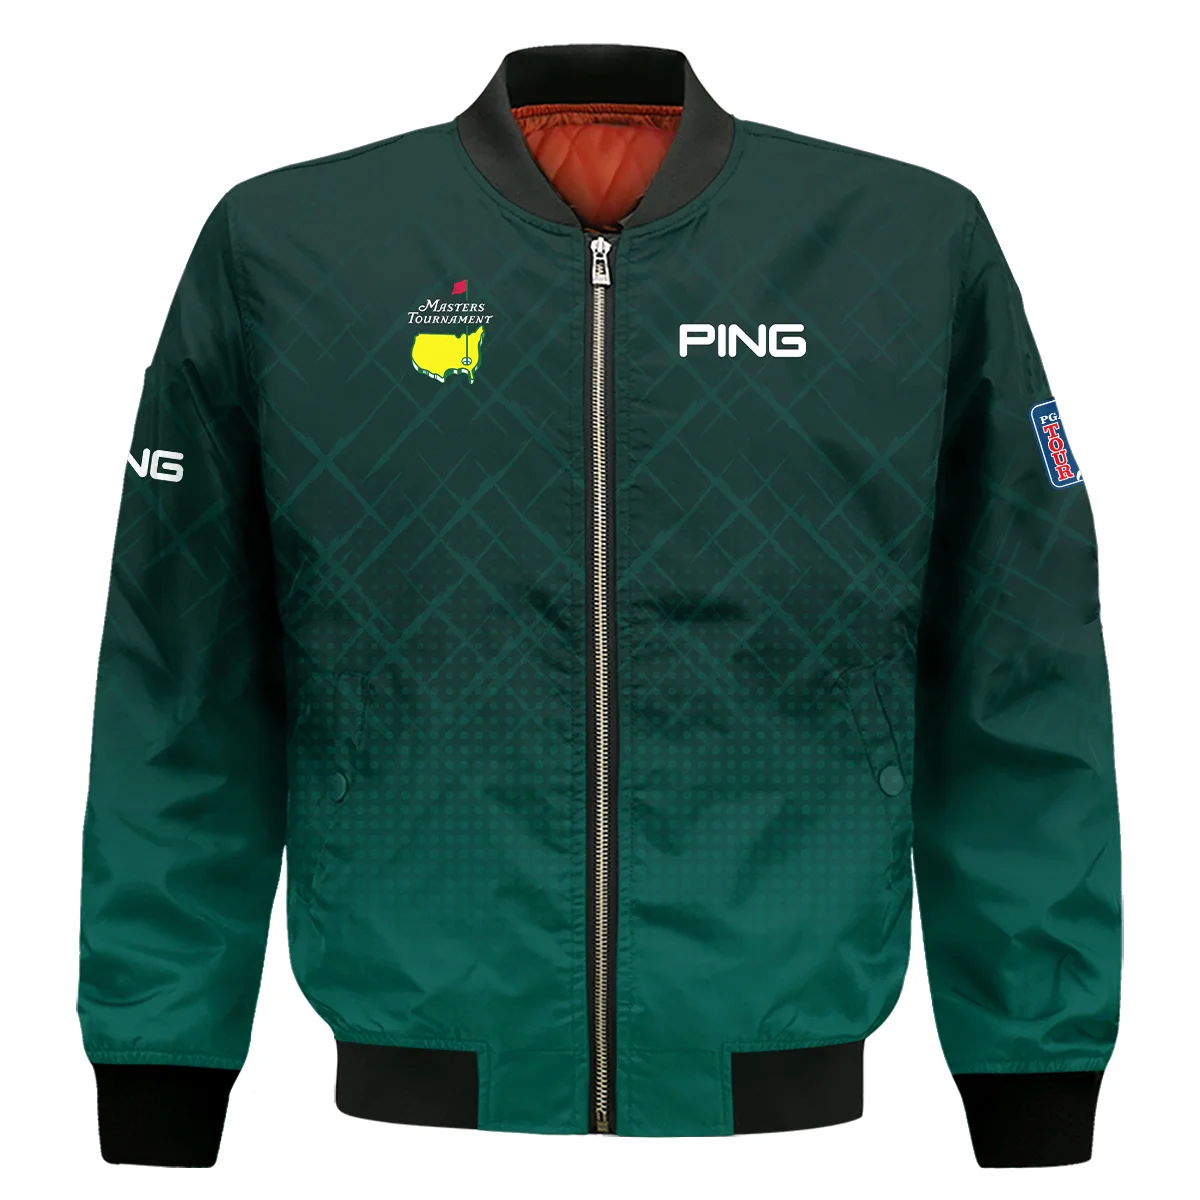 Ping Masters Tournament Sport Jersey Pattern Dark Green Bomber Jacket Style Classic Bomber Jacket